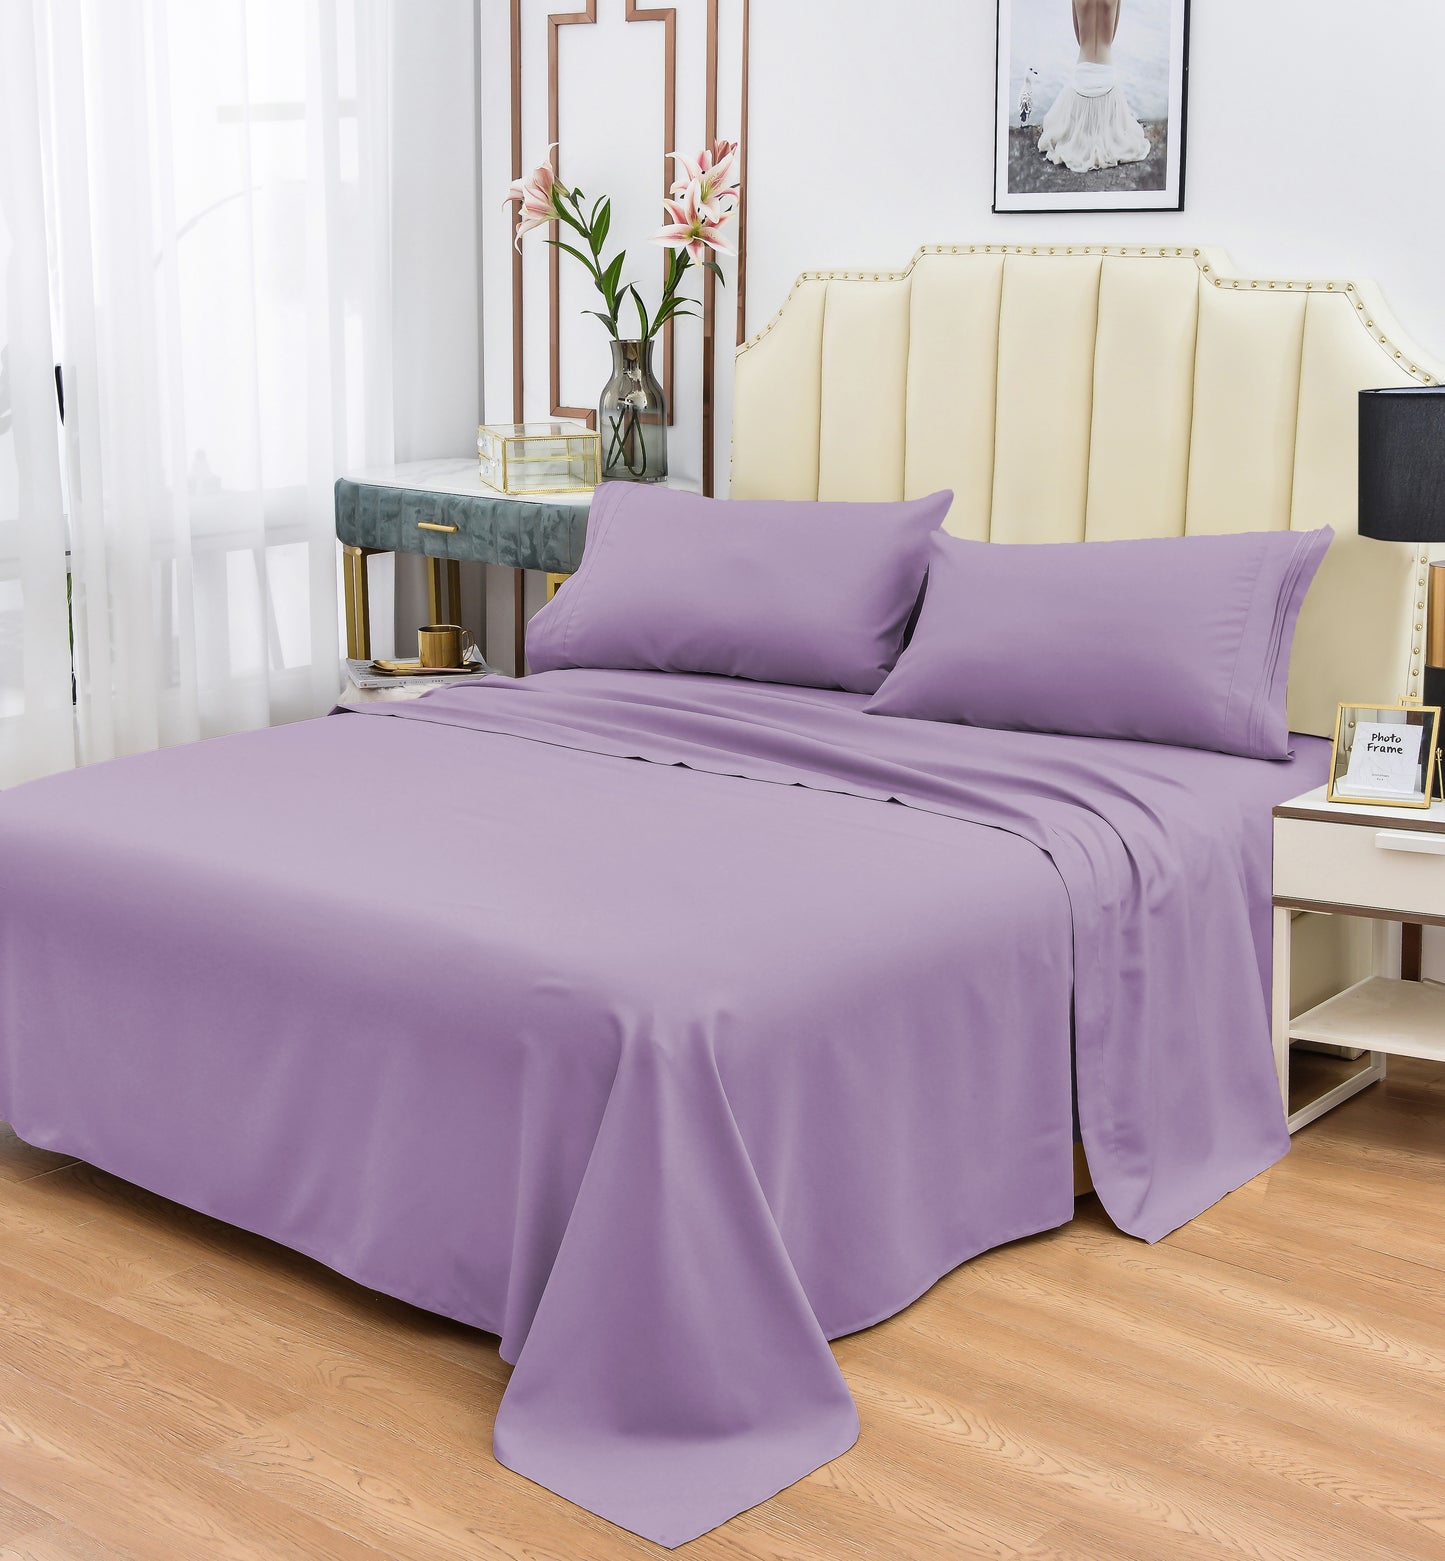 Cool Bamboo – Bed Sheet Sets ( More Color Options)